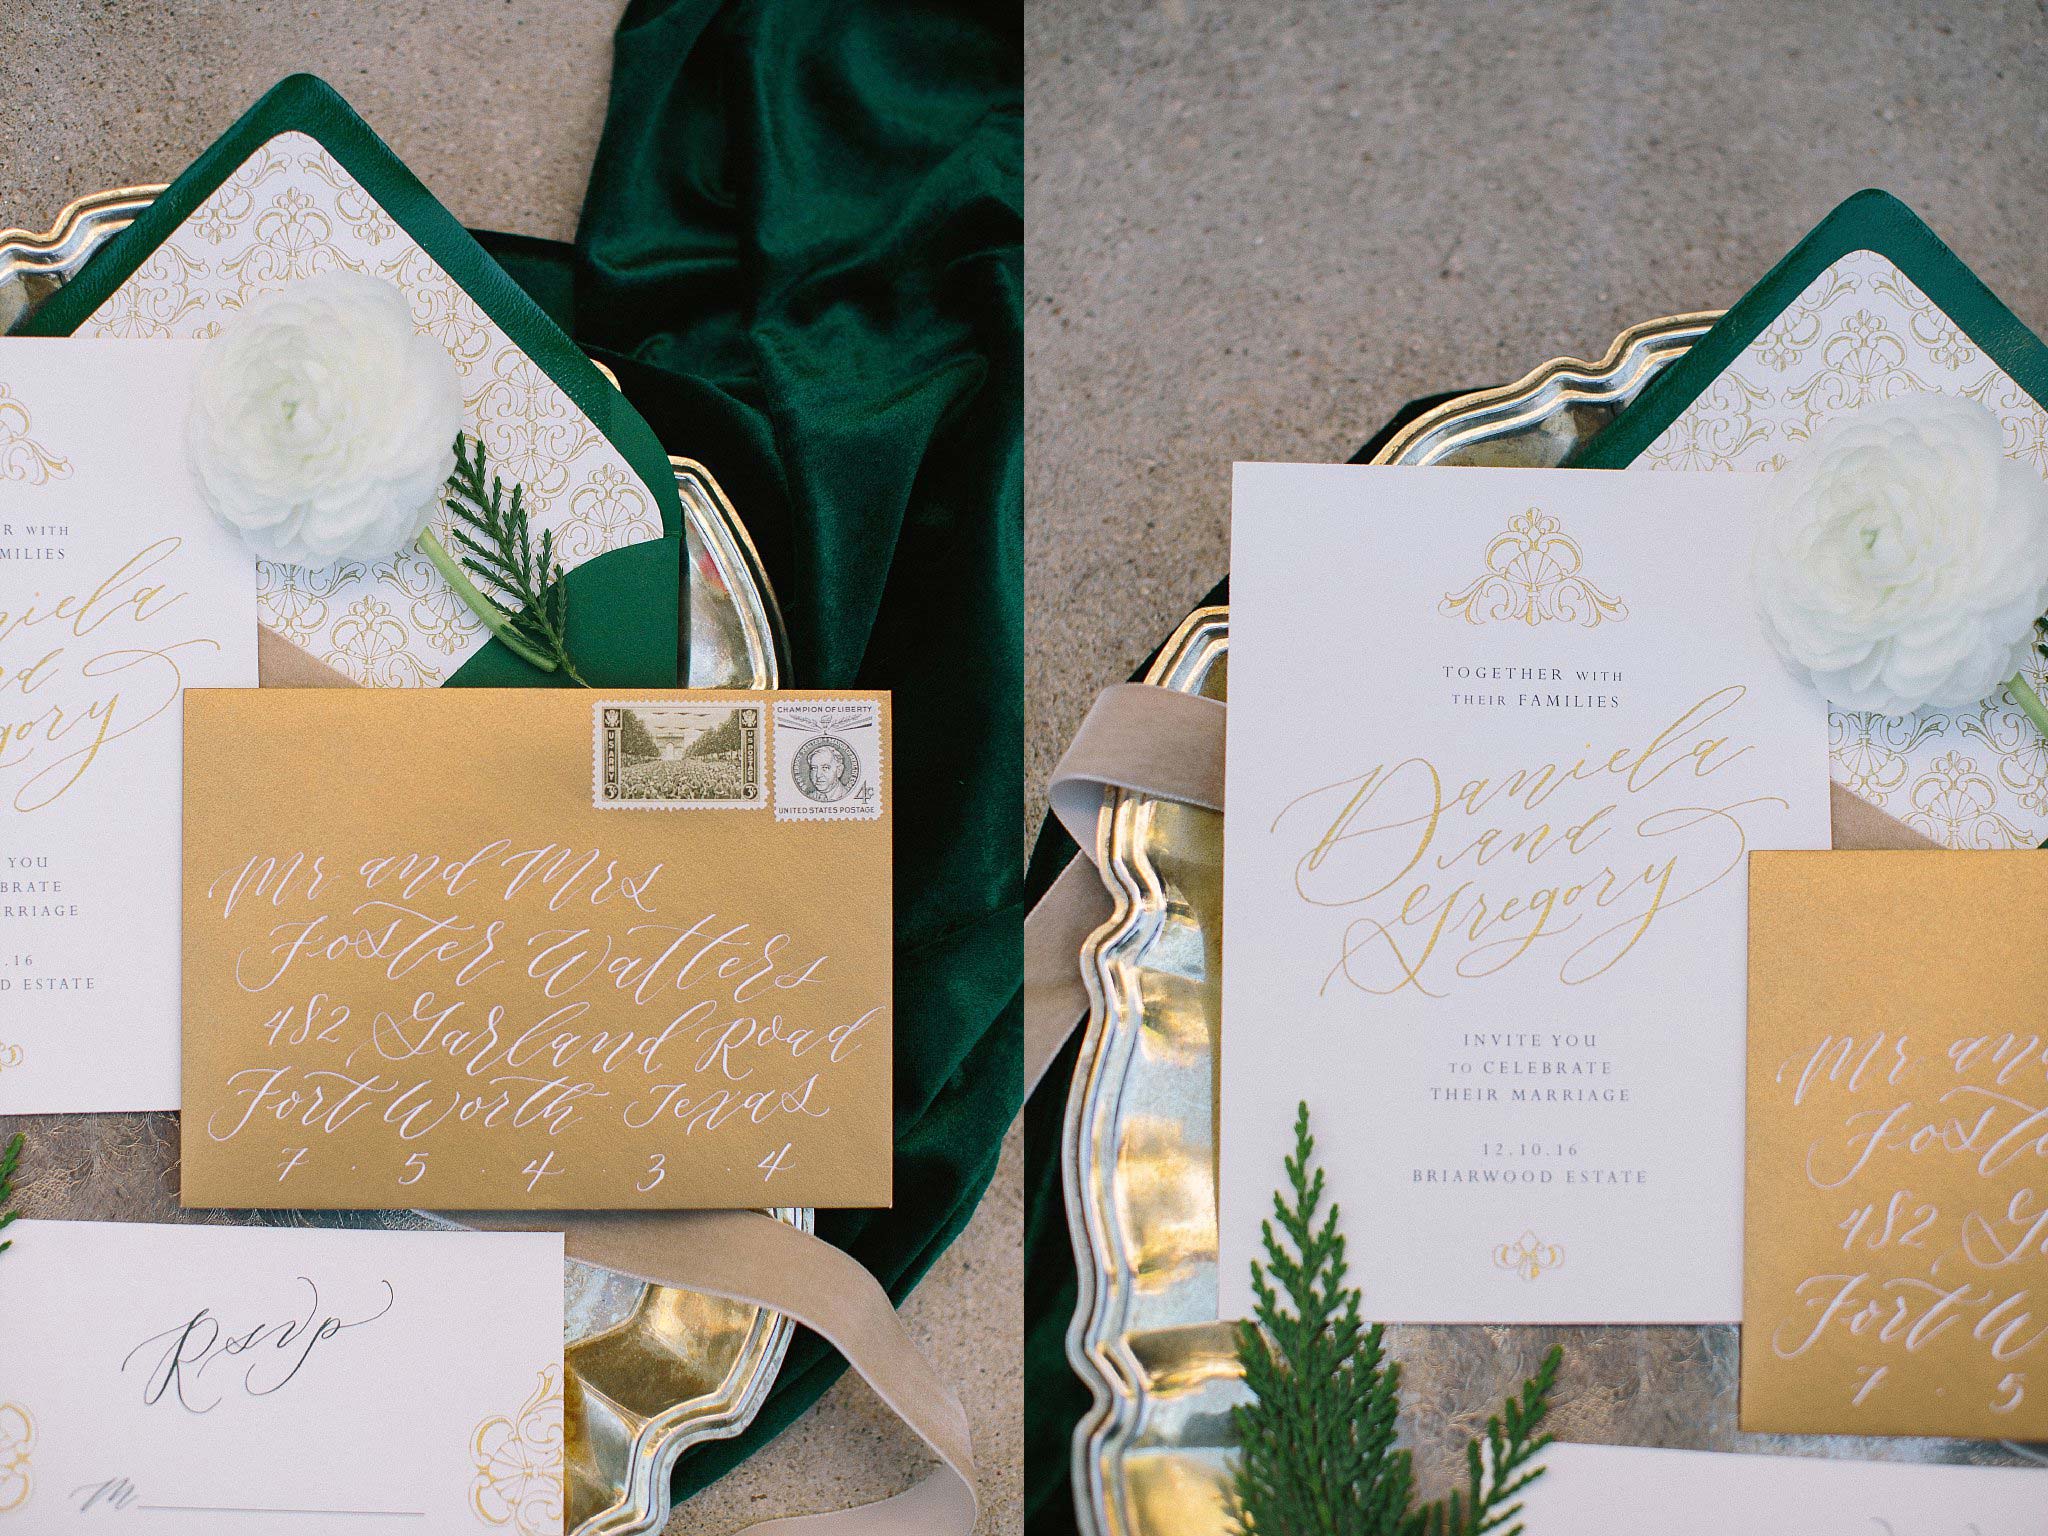 aristide mansfield wedding green and gold invitations with gold monogram